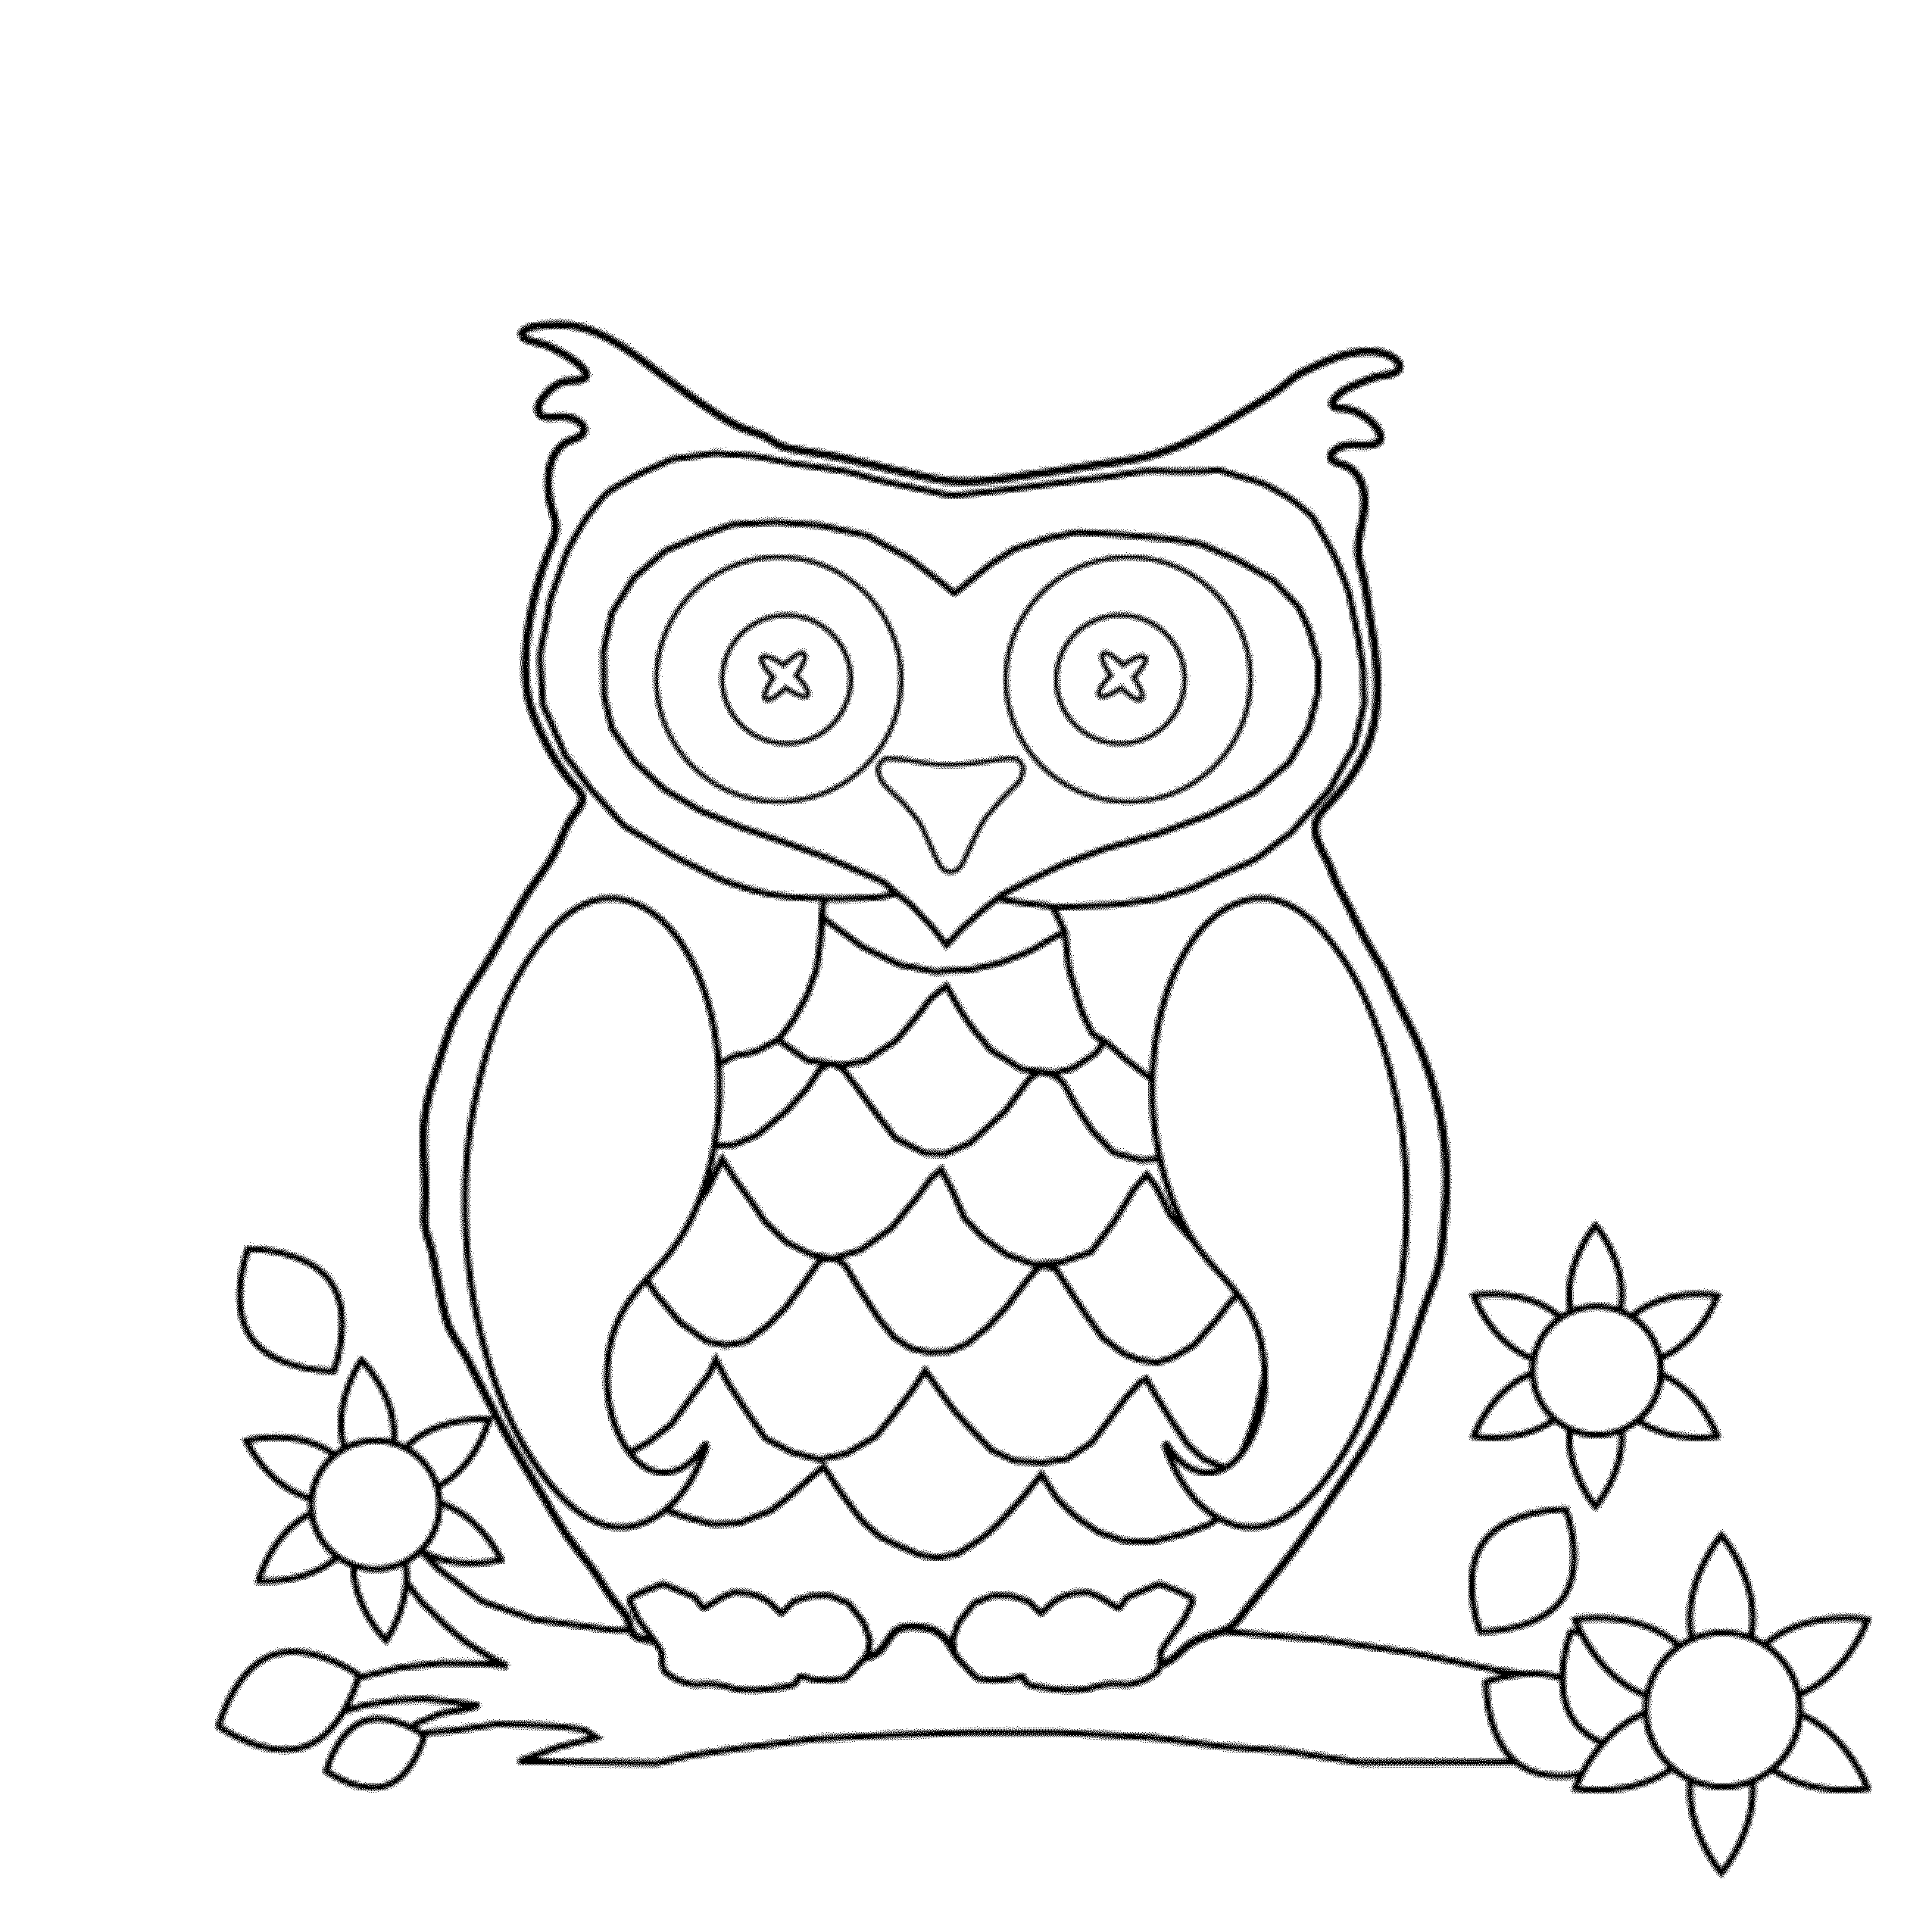 owl cartoon coloring pages print download owl coloring pages for your kids cartoon owl coloring pages 